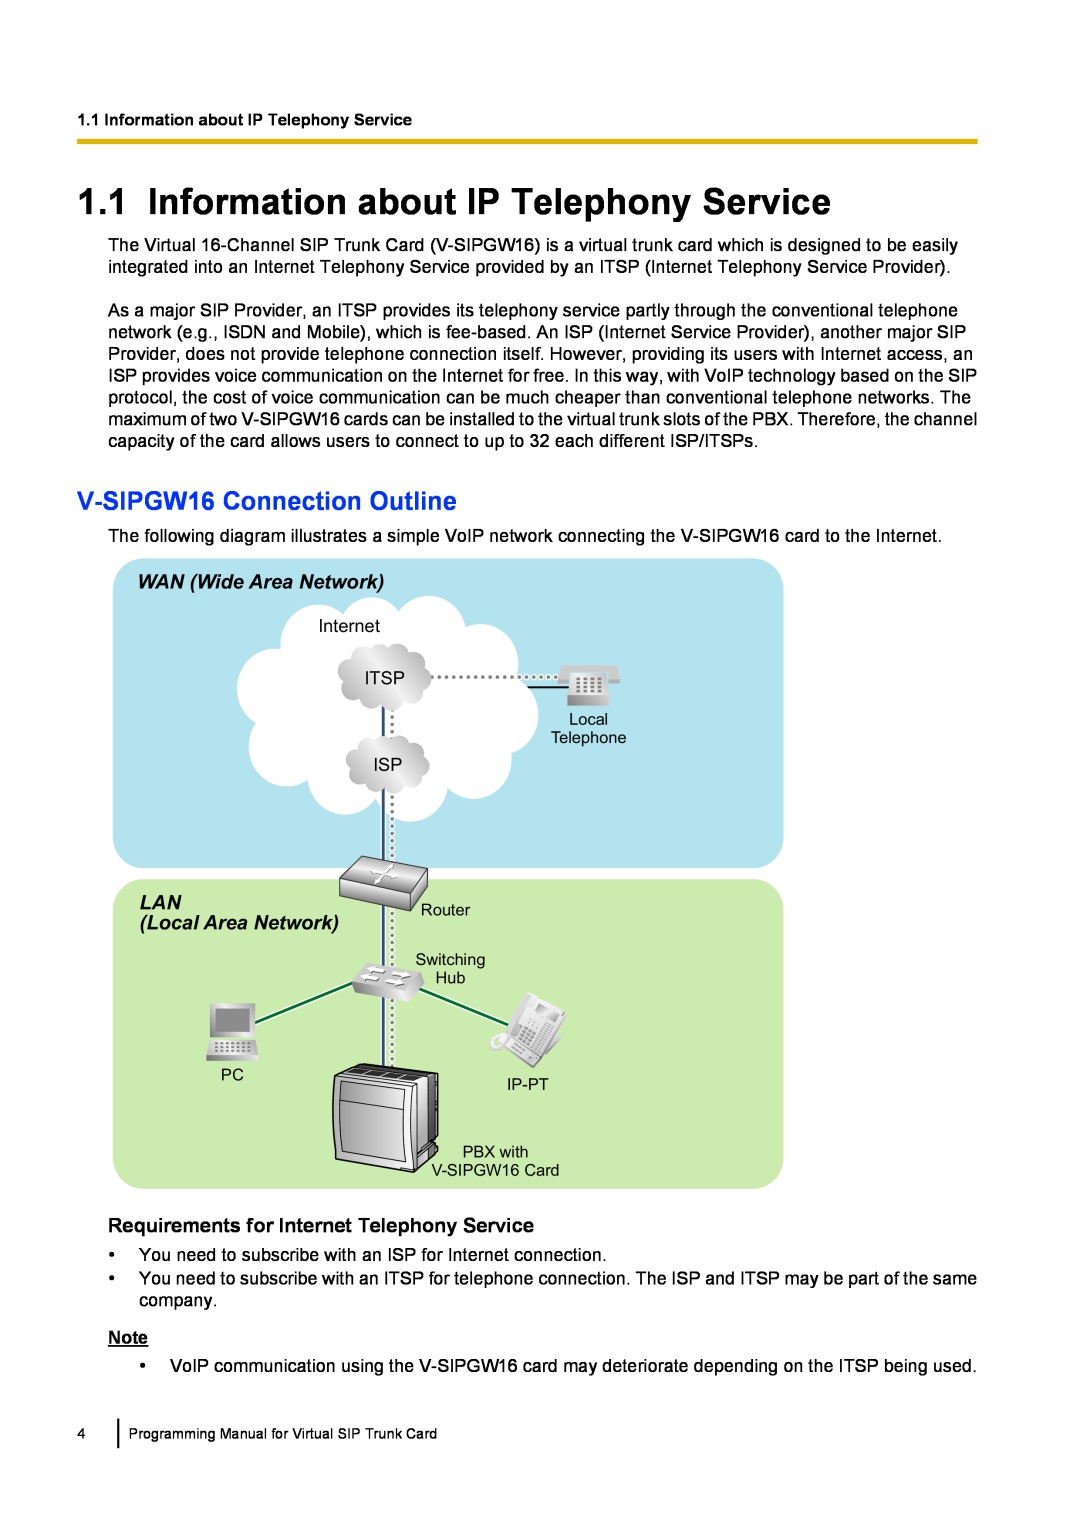 Panasonic KX-TDE100 manual Information about IP Telephony Service, V-SIPGW16 Connection Outline, WAN Wide Area Network 